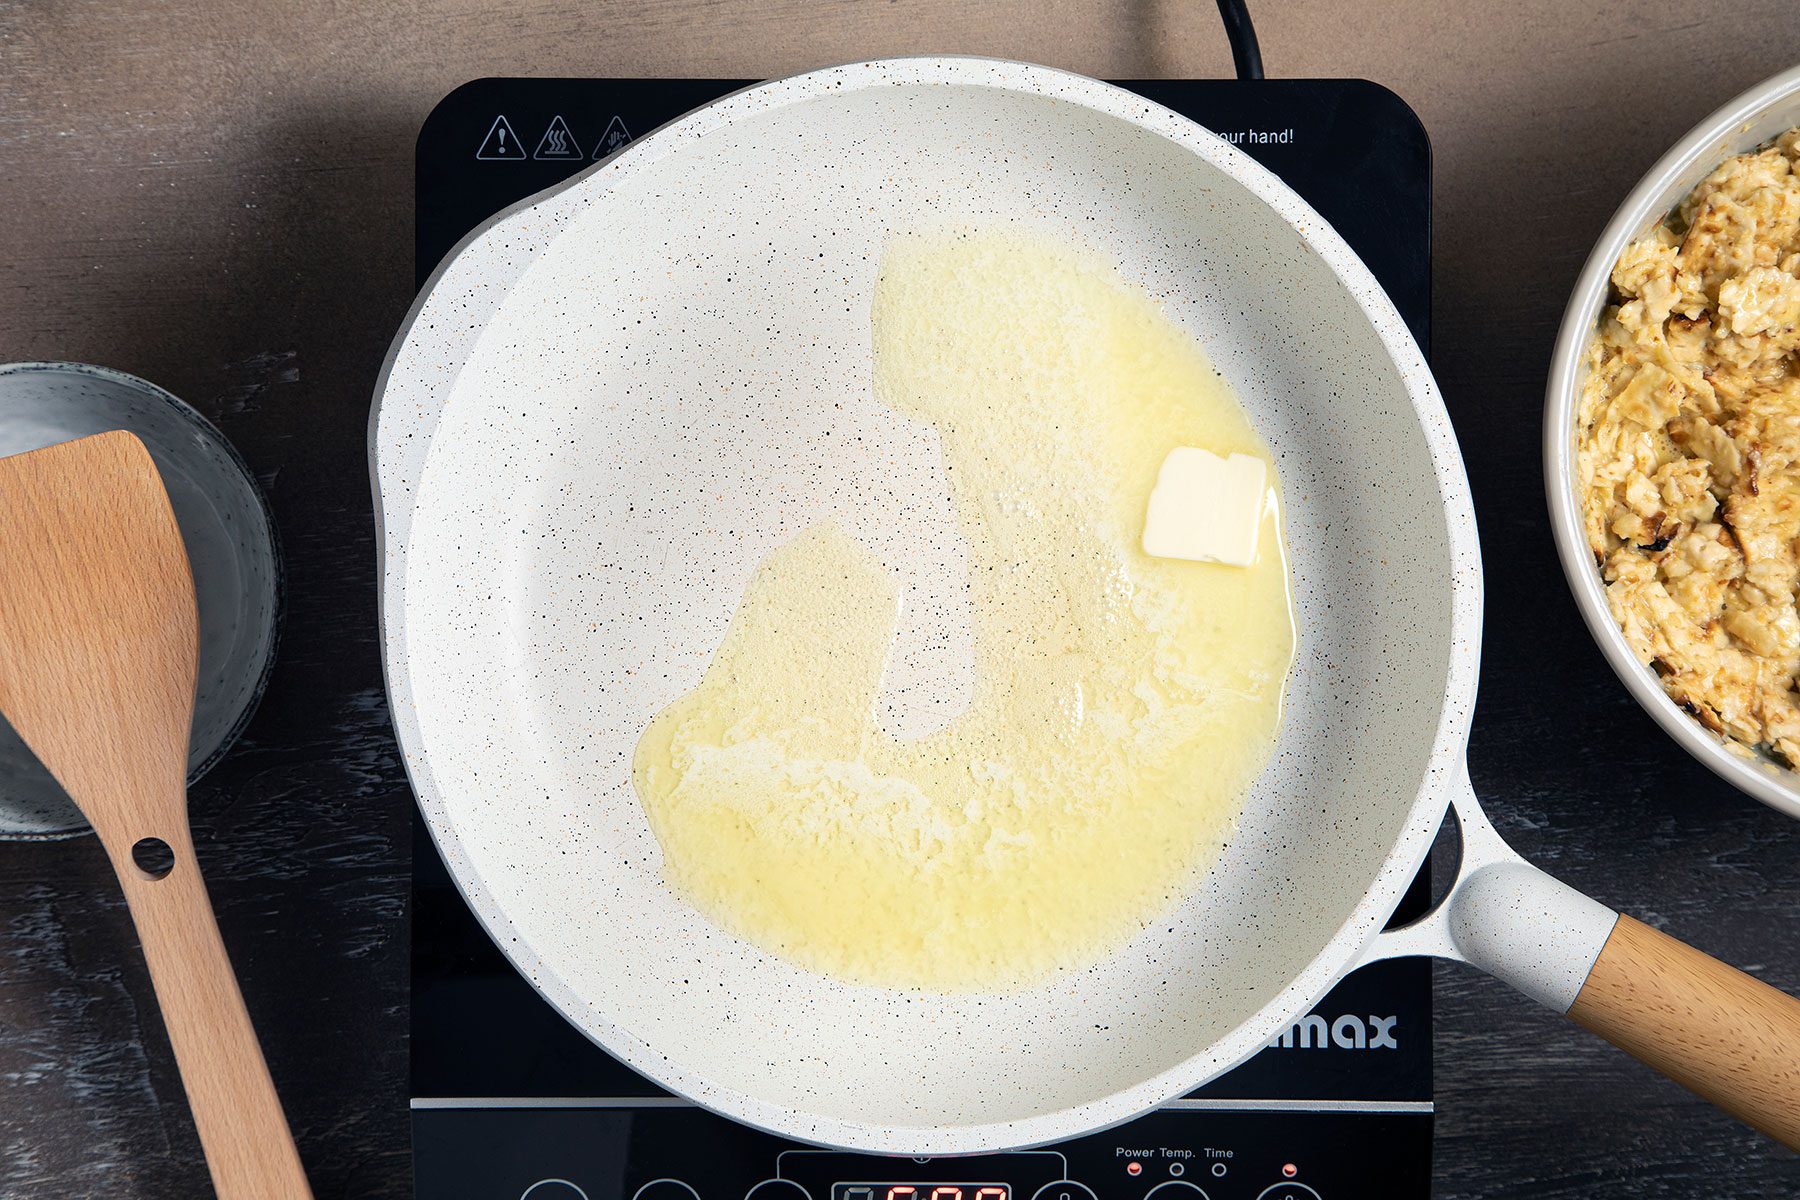 Melting butter in a pan over heat